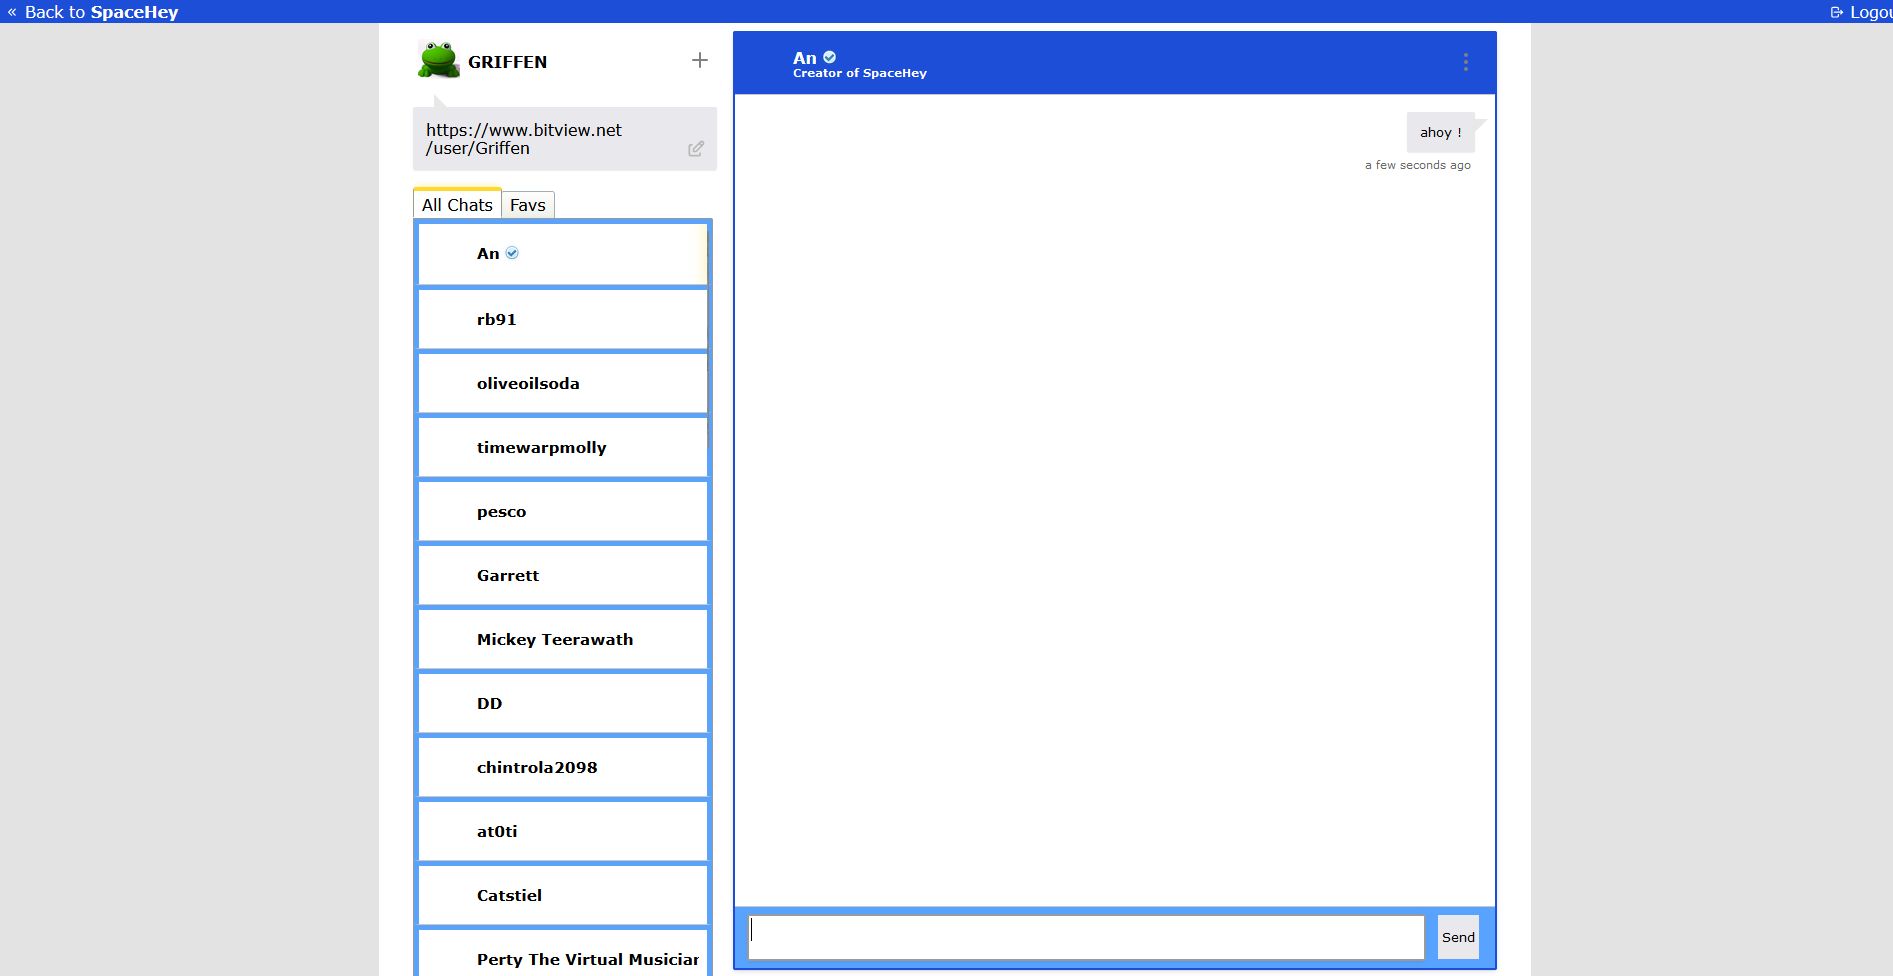 Screenshot of OLD SPACEHEY MESSENGER